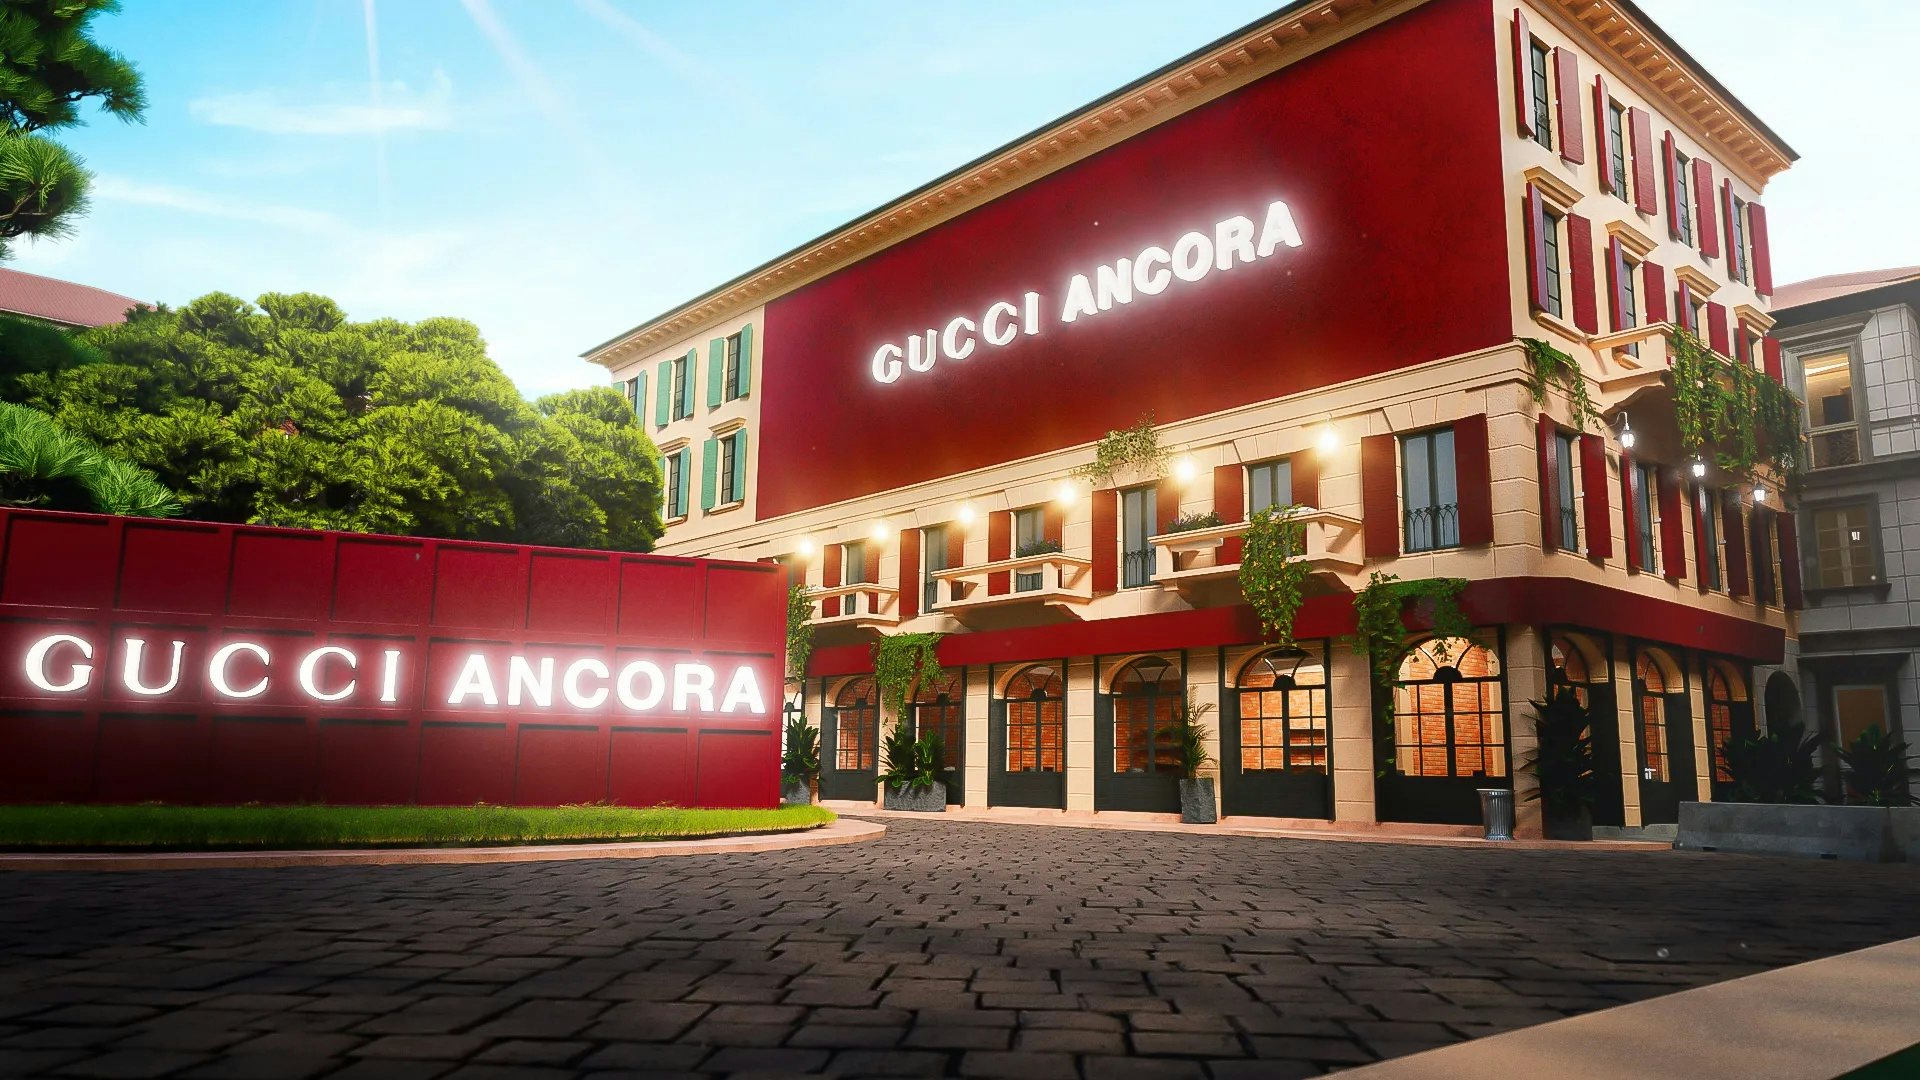 A virtual version of the Gucci Ancora showcase popped up in Roblox, Zepeto, and China's QQ. Photo: Zepeto